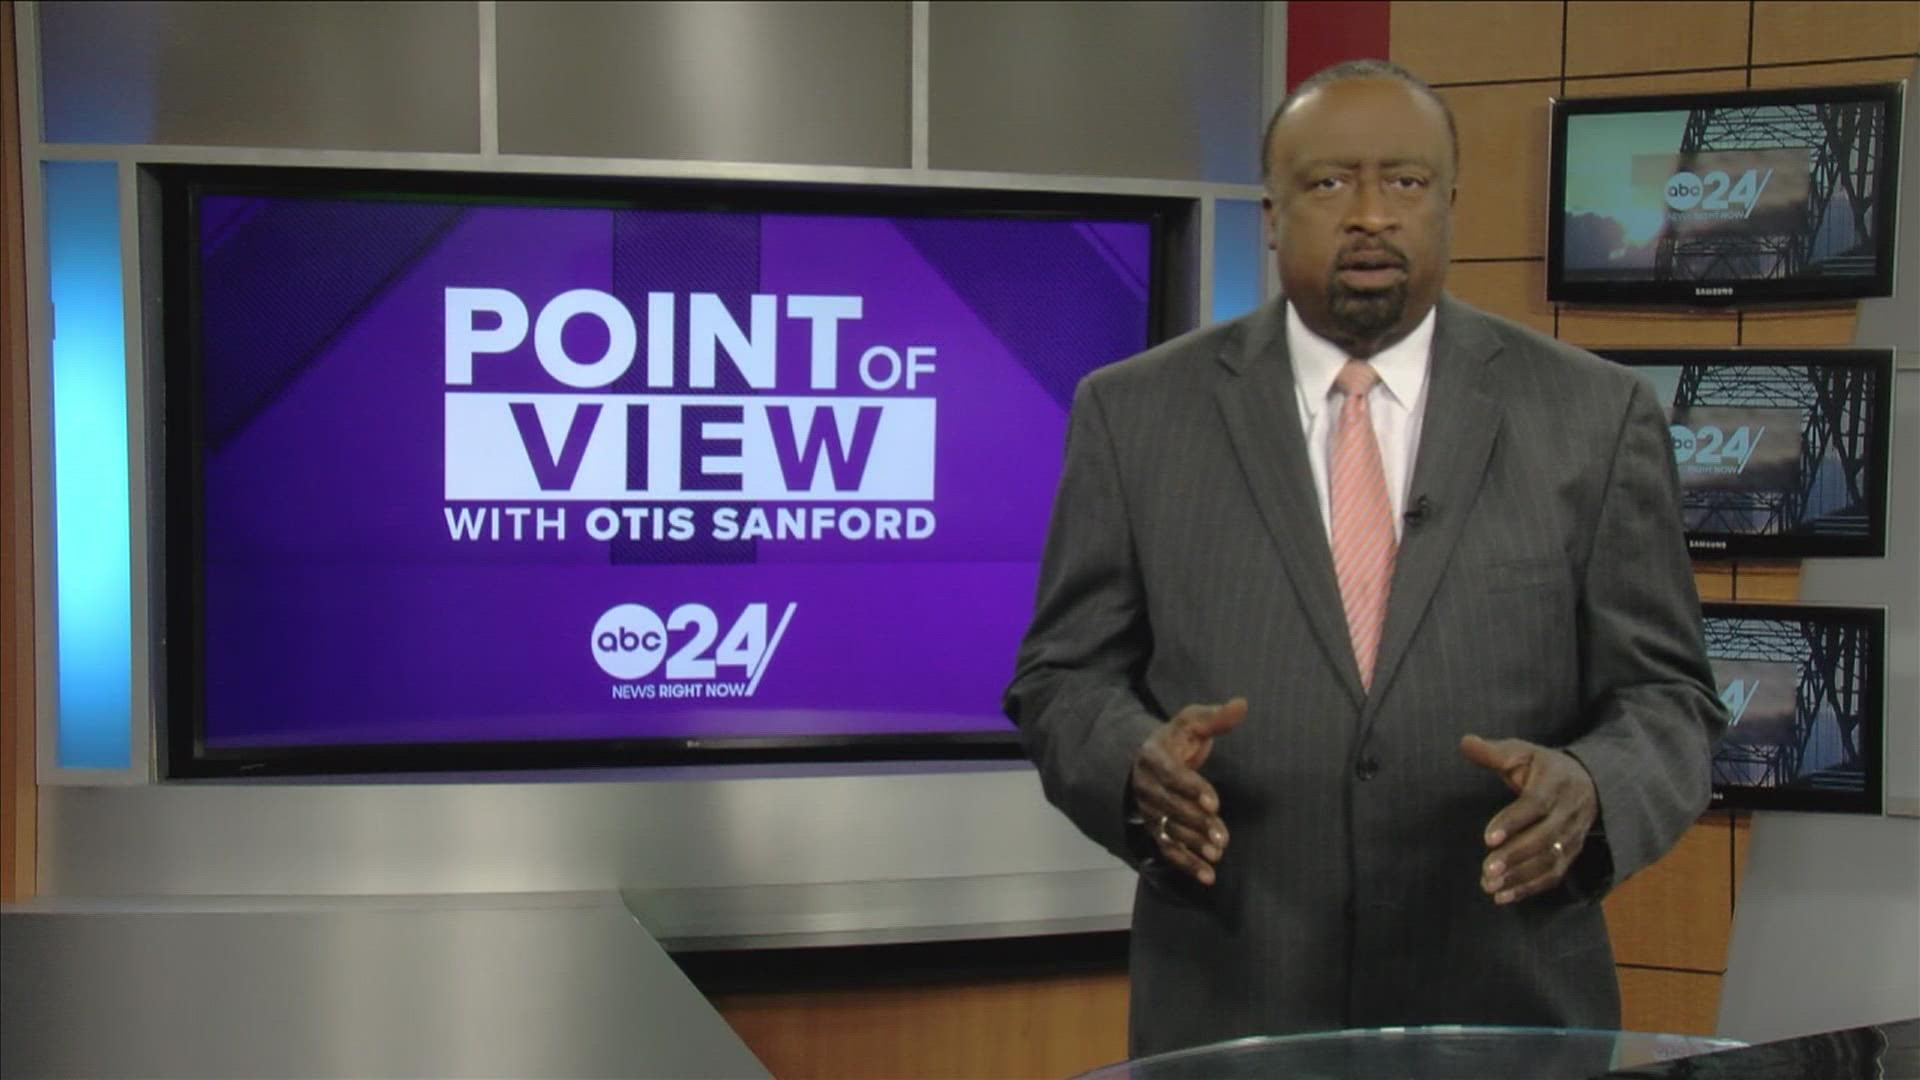 ABC24 political analyst and commentator Otis Sanford shared his point of view on the meaning of Independence Day.